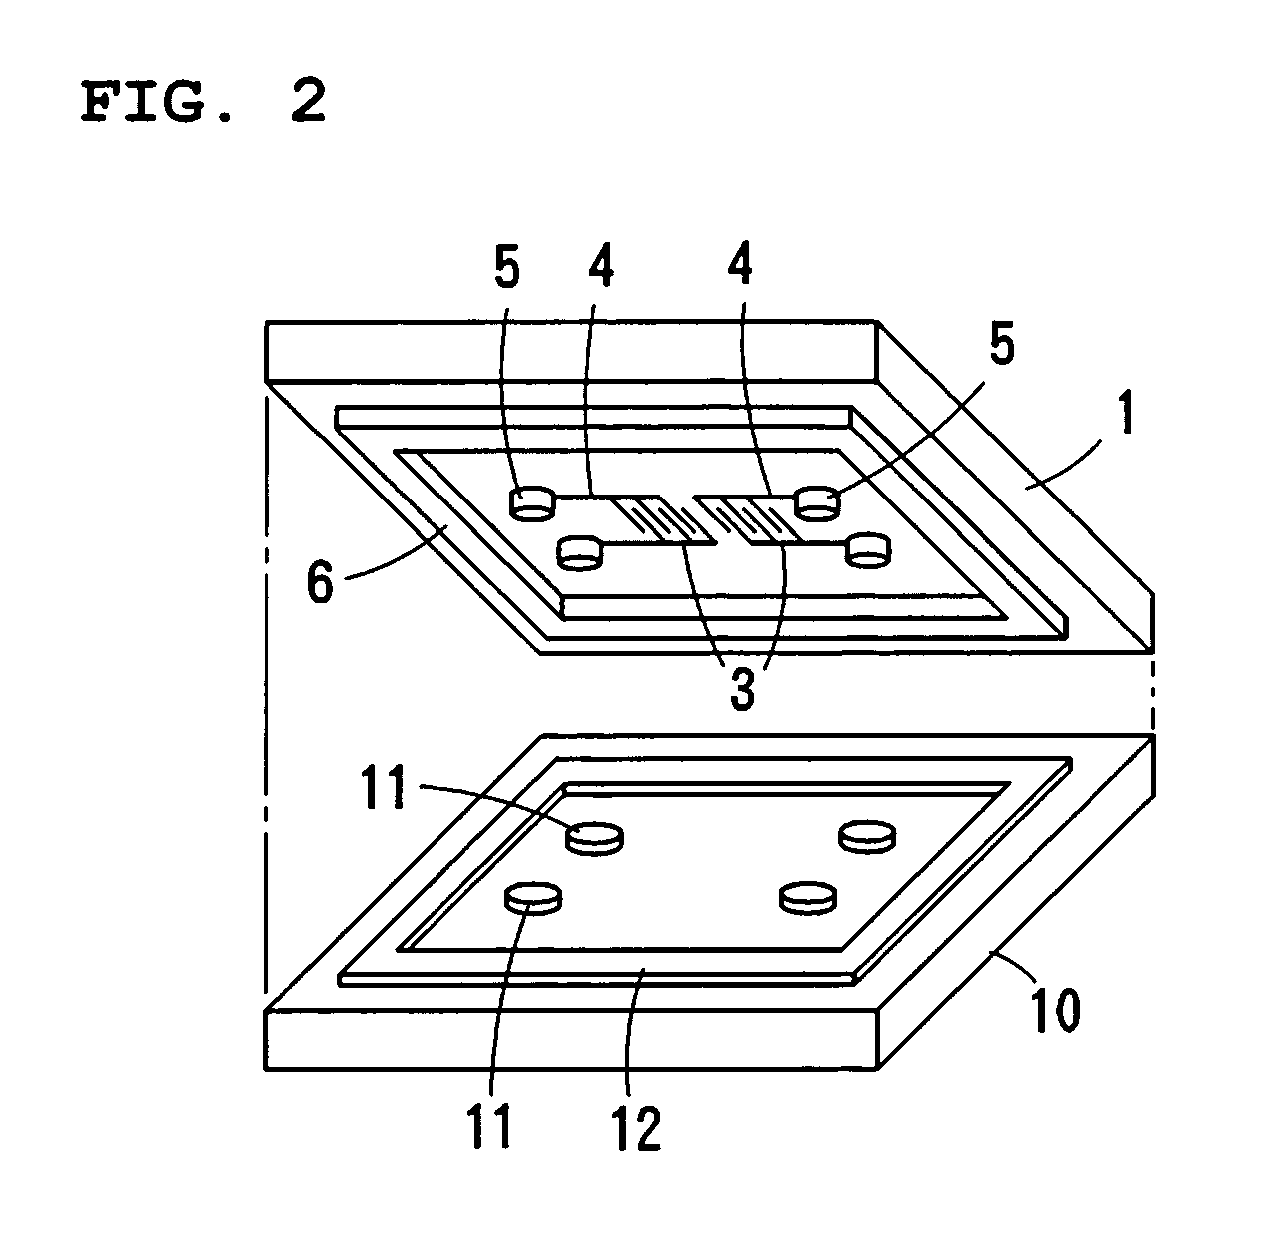 Hermetically sealing a package to include a barrier metal